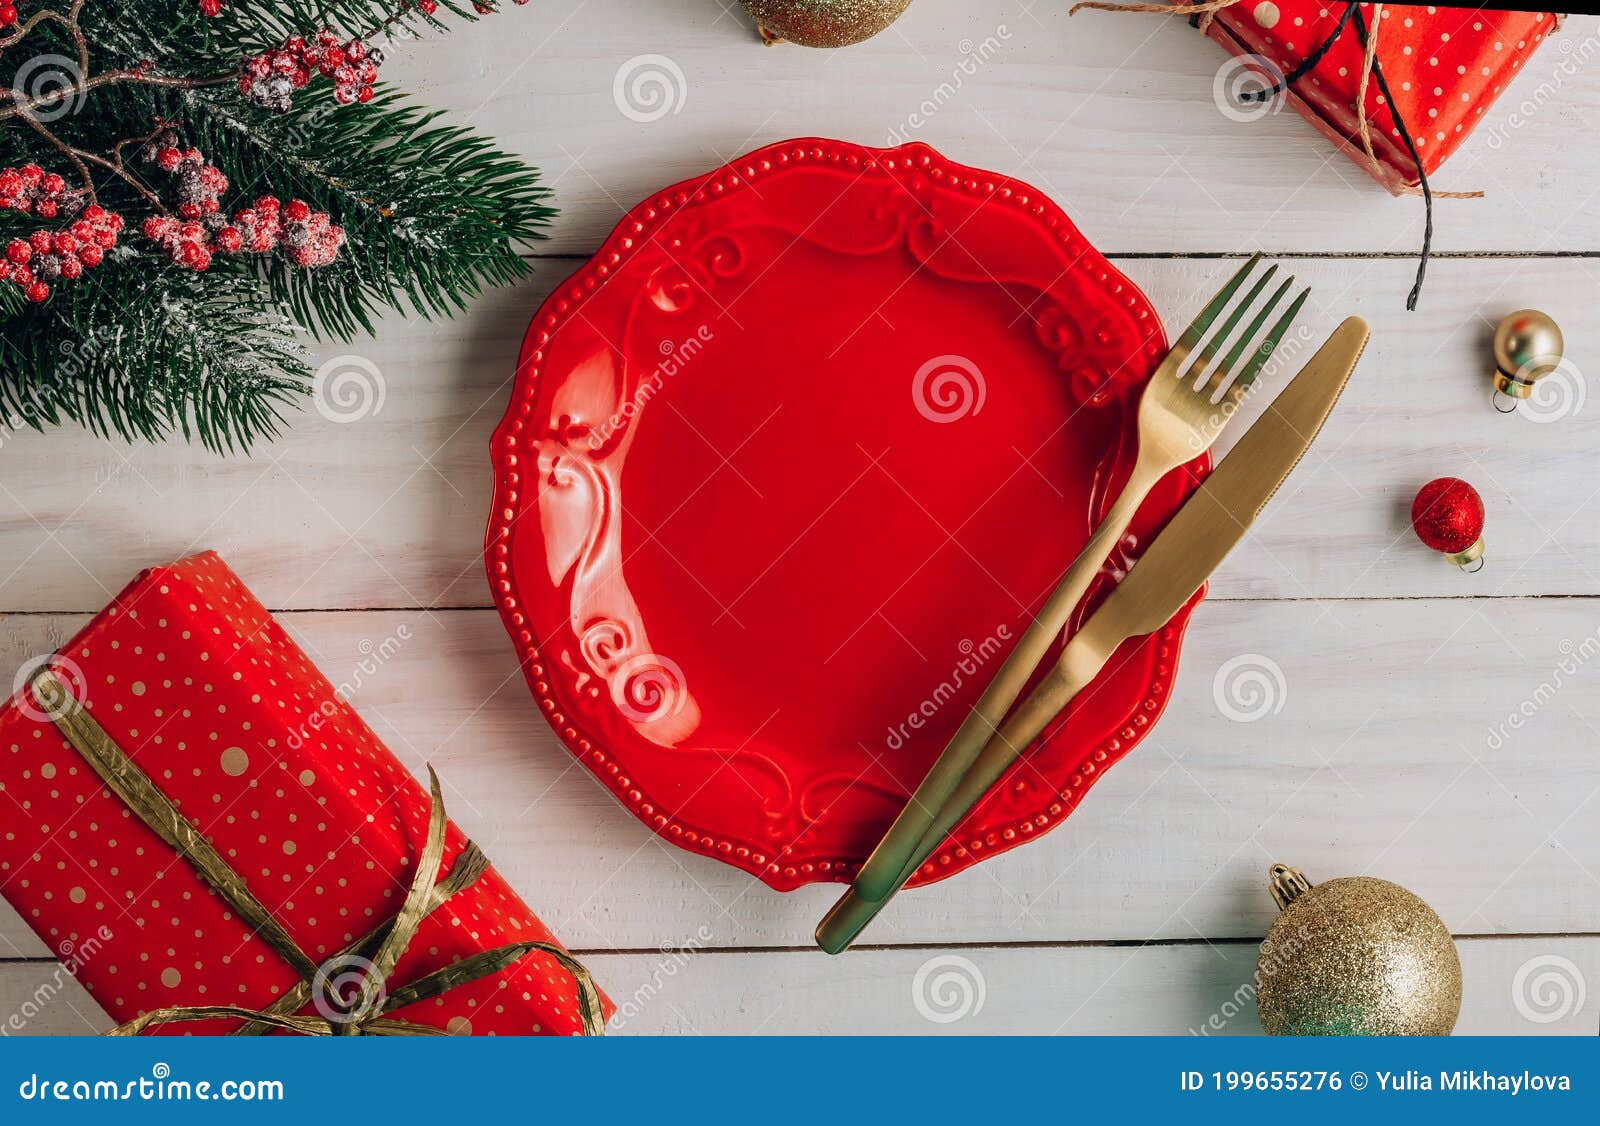 Christmas Table Place Setting with Empty Plate and Cutlery on White ...